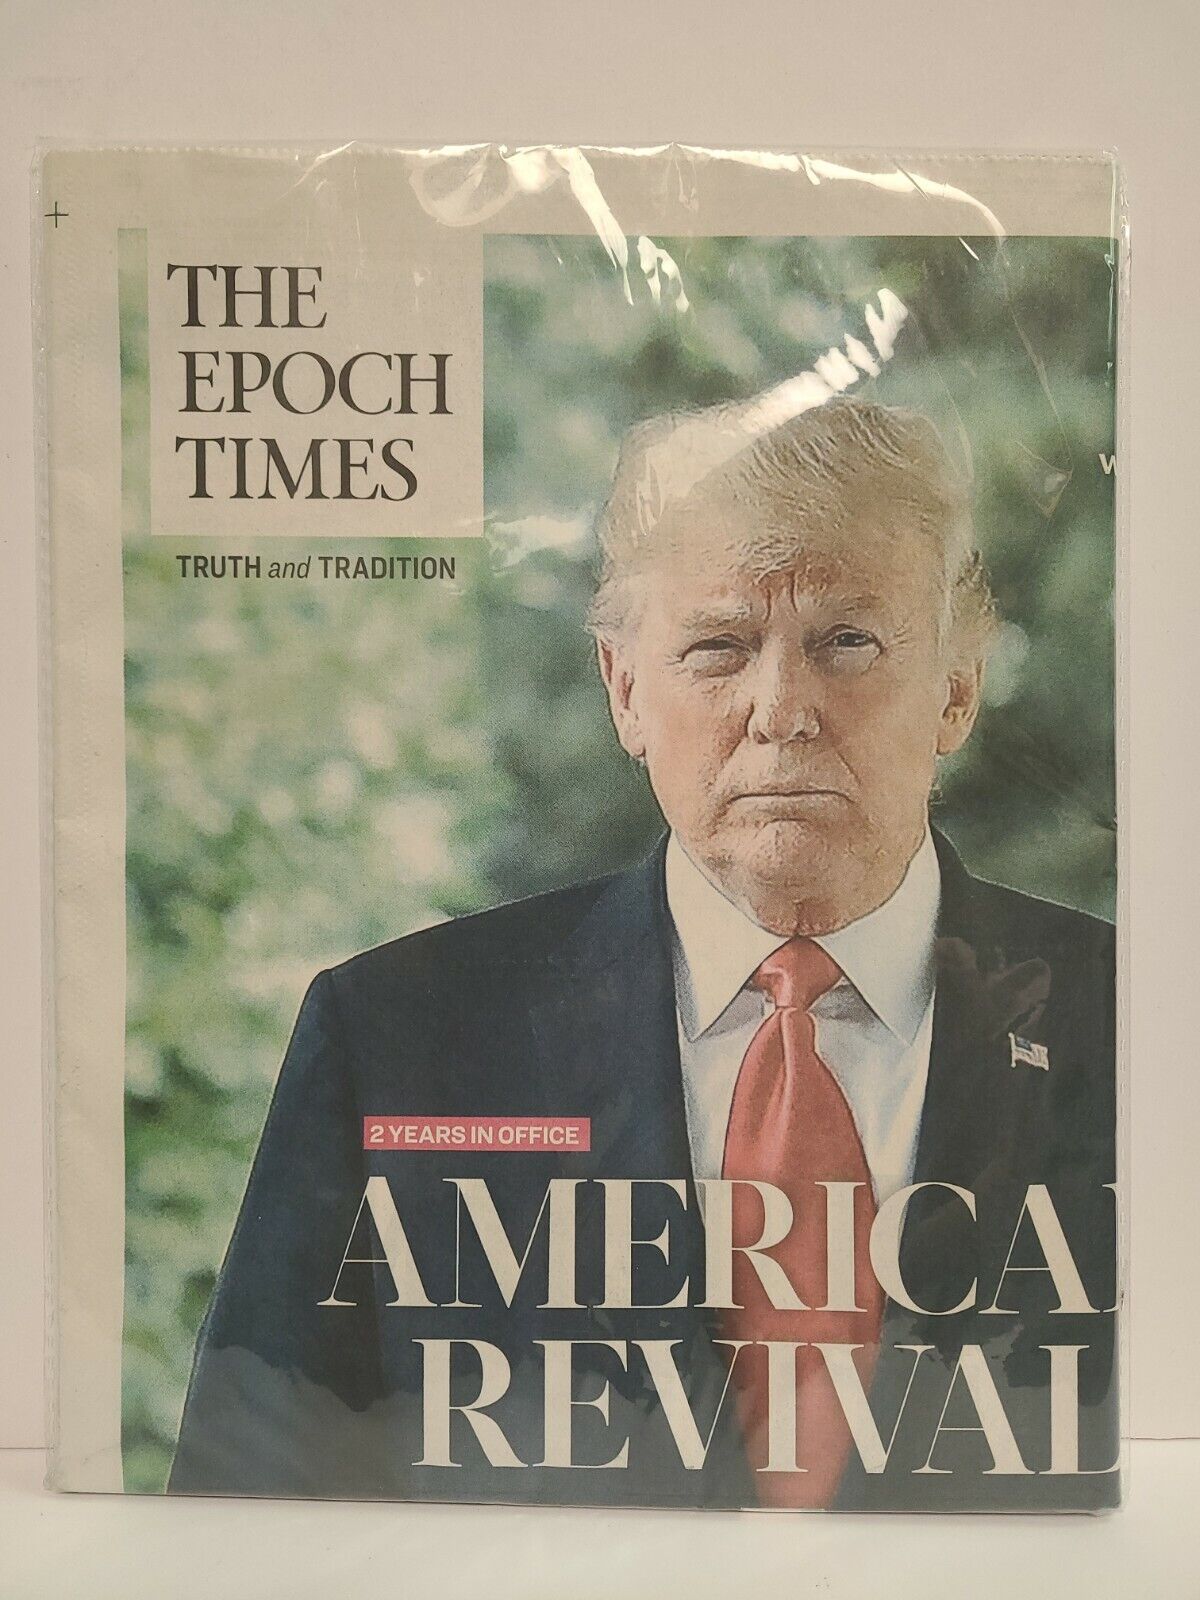 The Epoch Times: Donald Trump March 2019 SPYGATE rare w/ Poster Collectable News